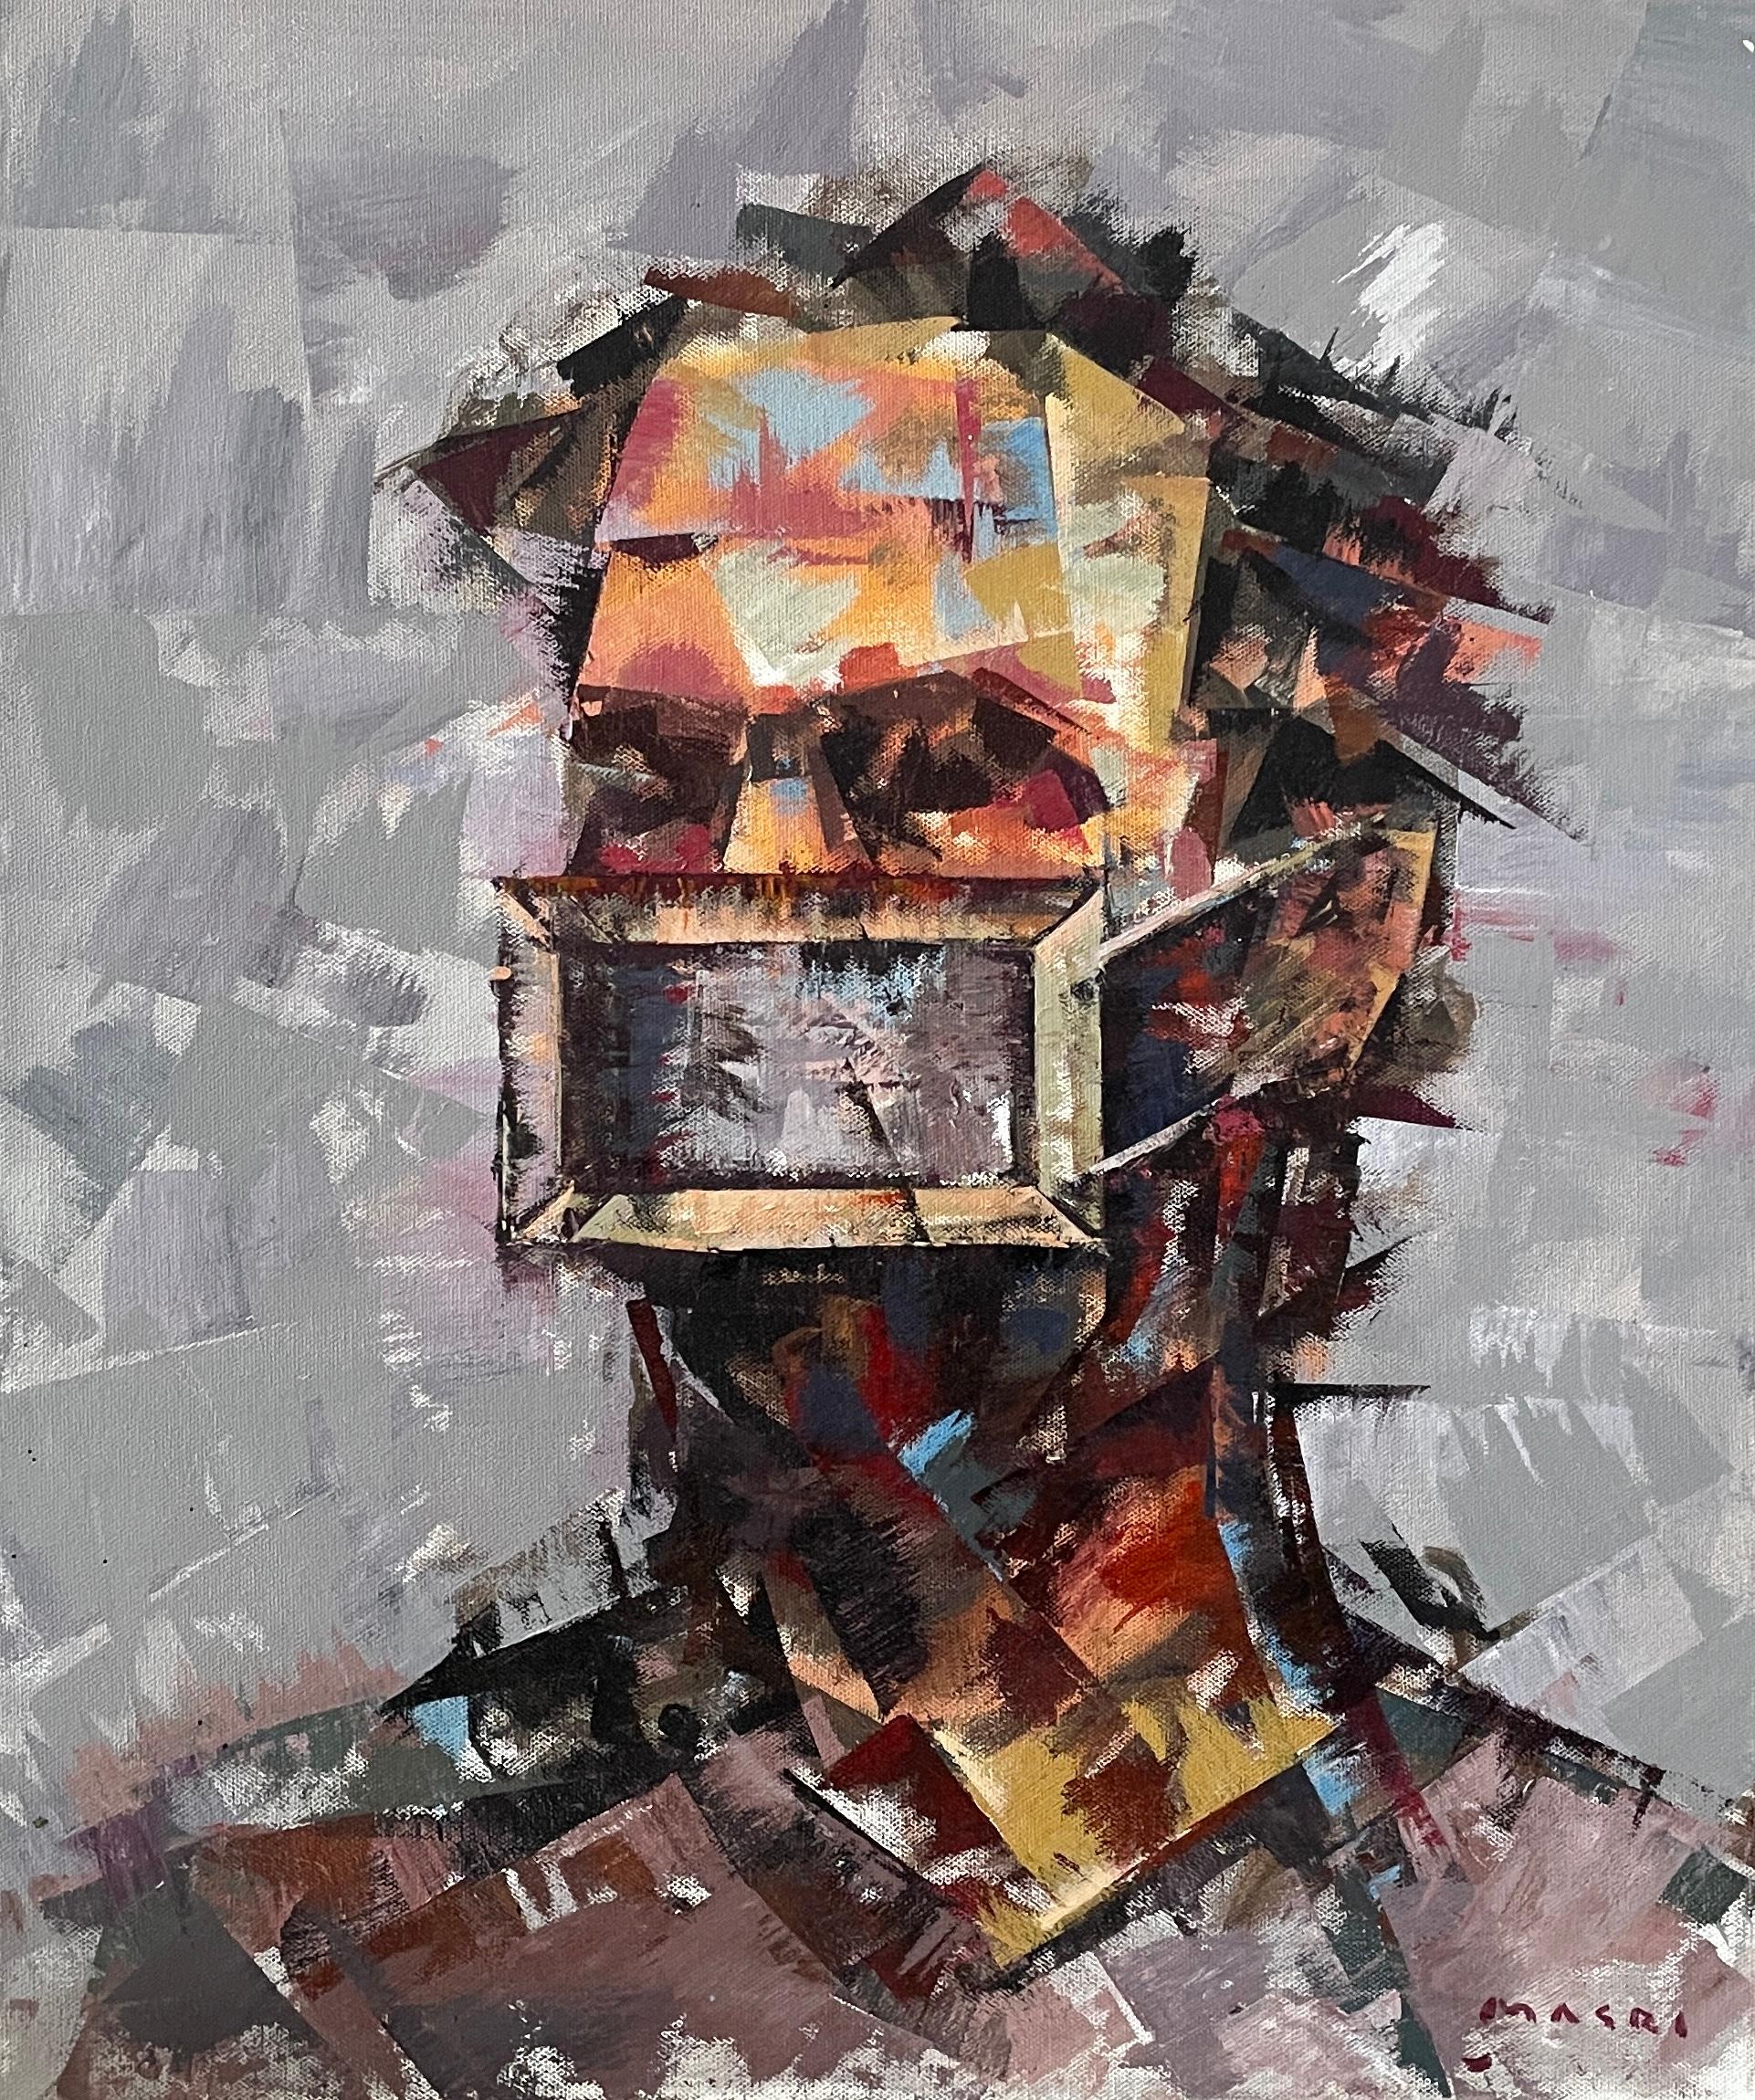 Masri Hayssam Abstract Painting - "Shattered Silence" Mixed Media Abstract Male Portrait Shattered Cubism by Masri